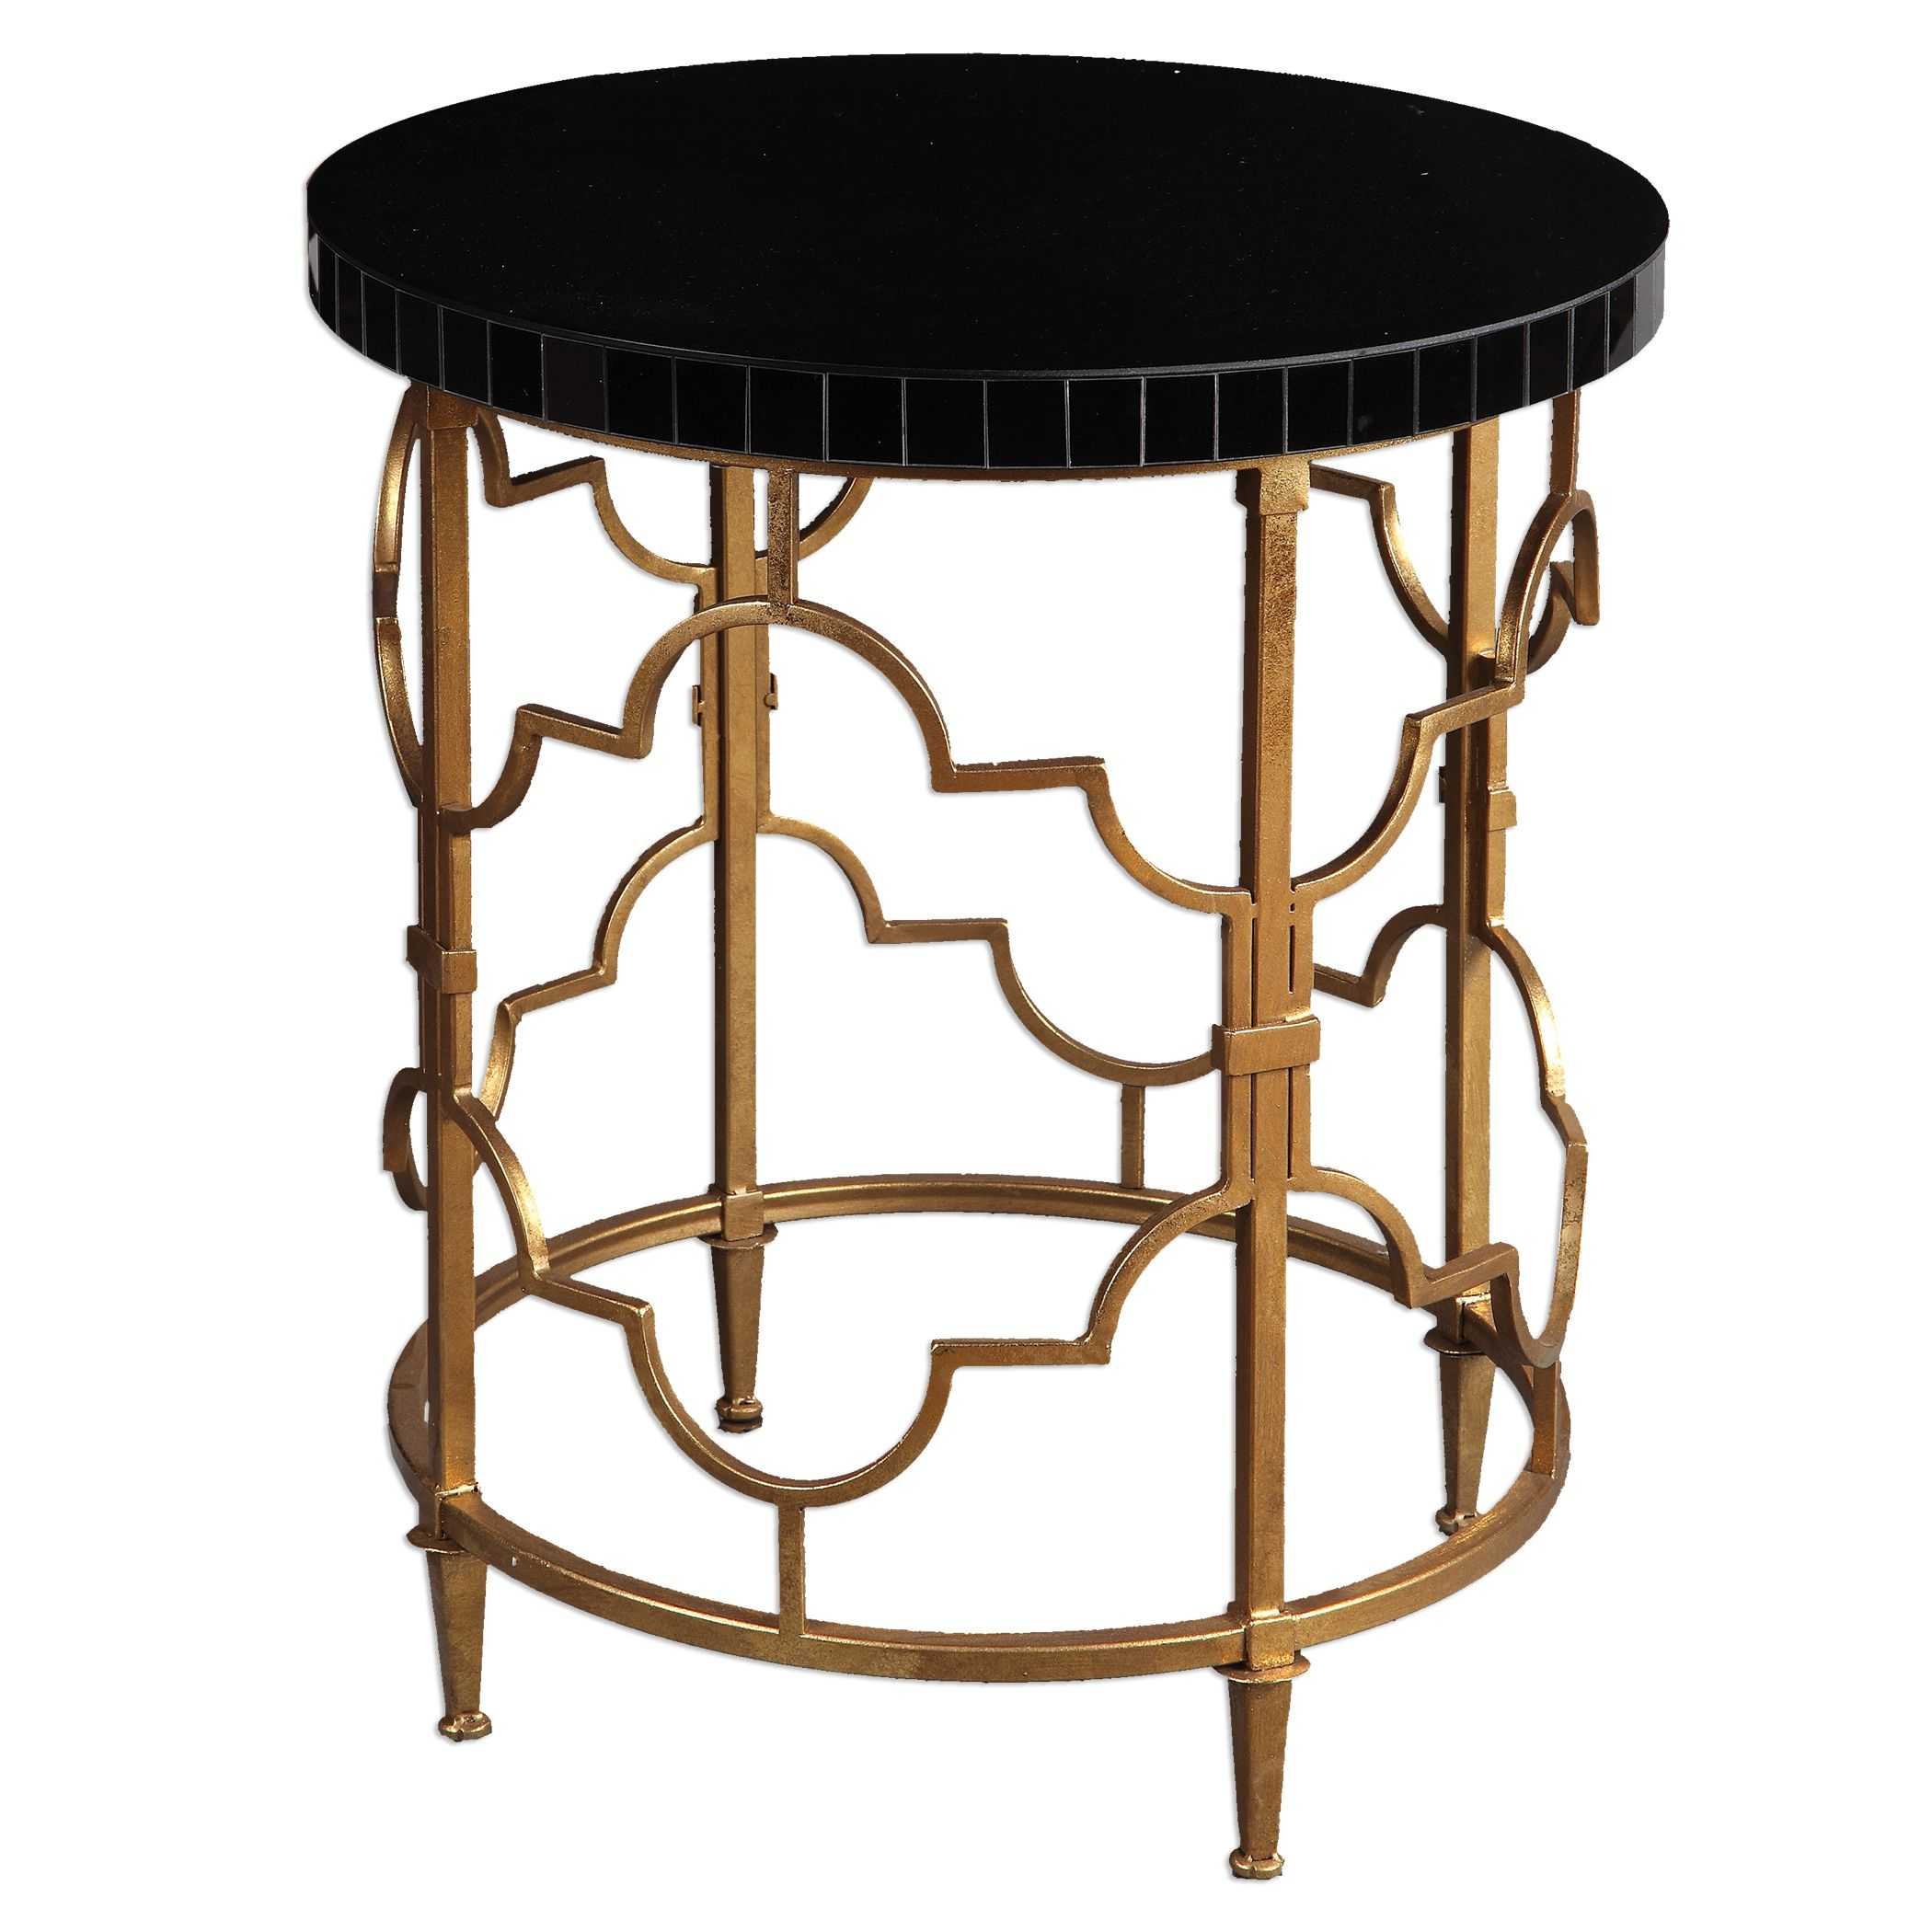 gold accent table target uttermost mosi black lamps white and oak side pier one ornaments tables cabinets round kitchen set tiffany nightstand triangle coffee ikea pulaski